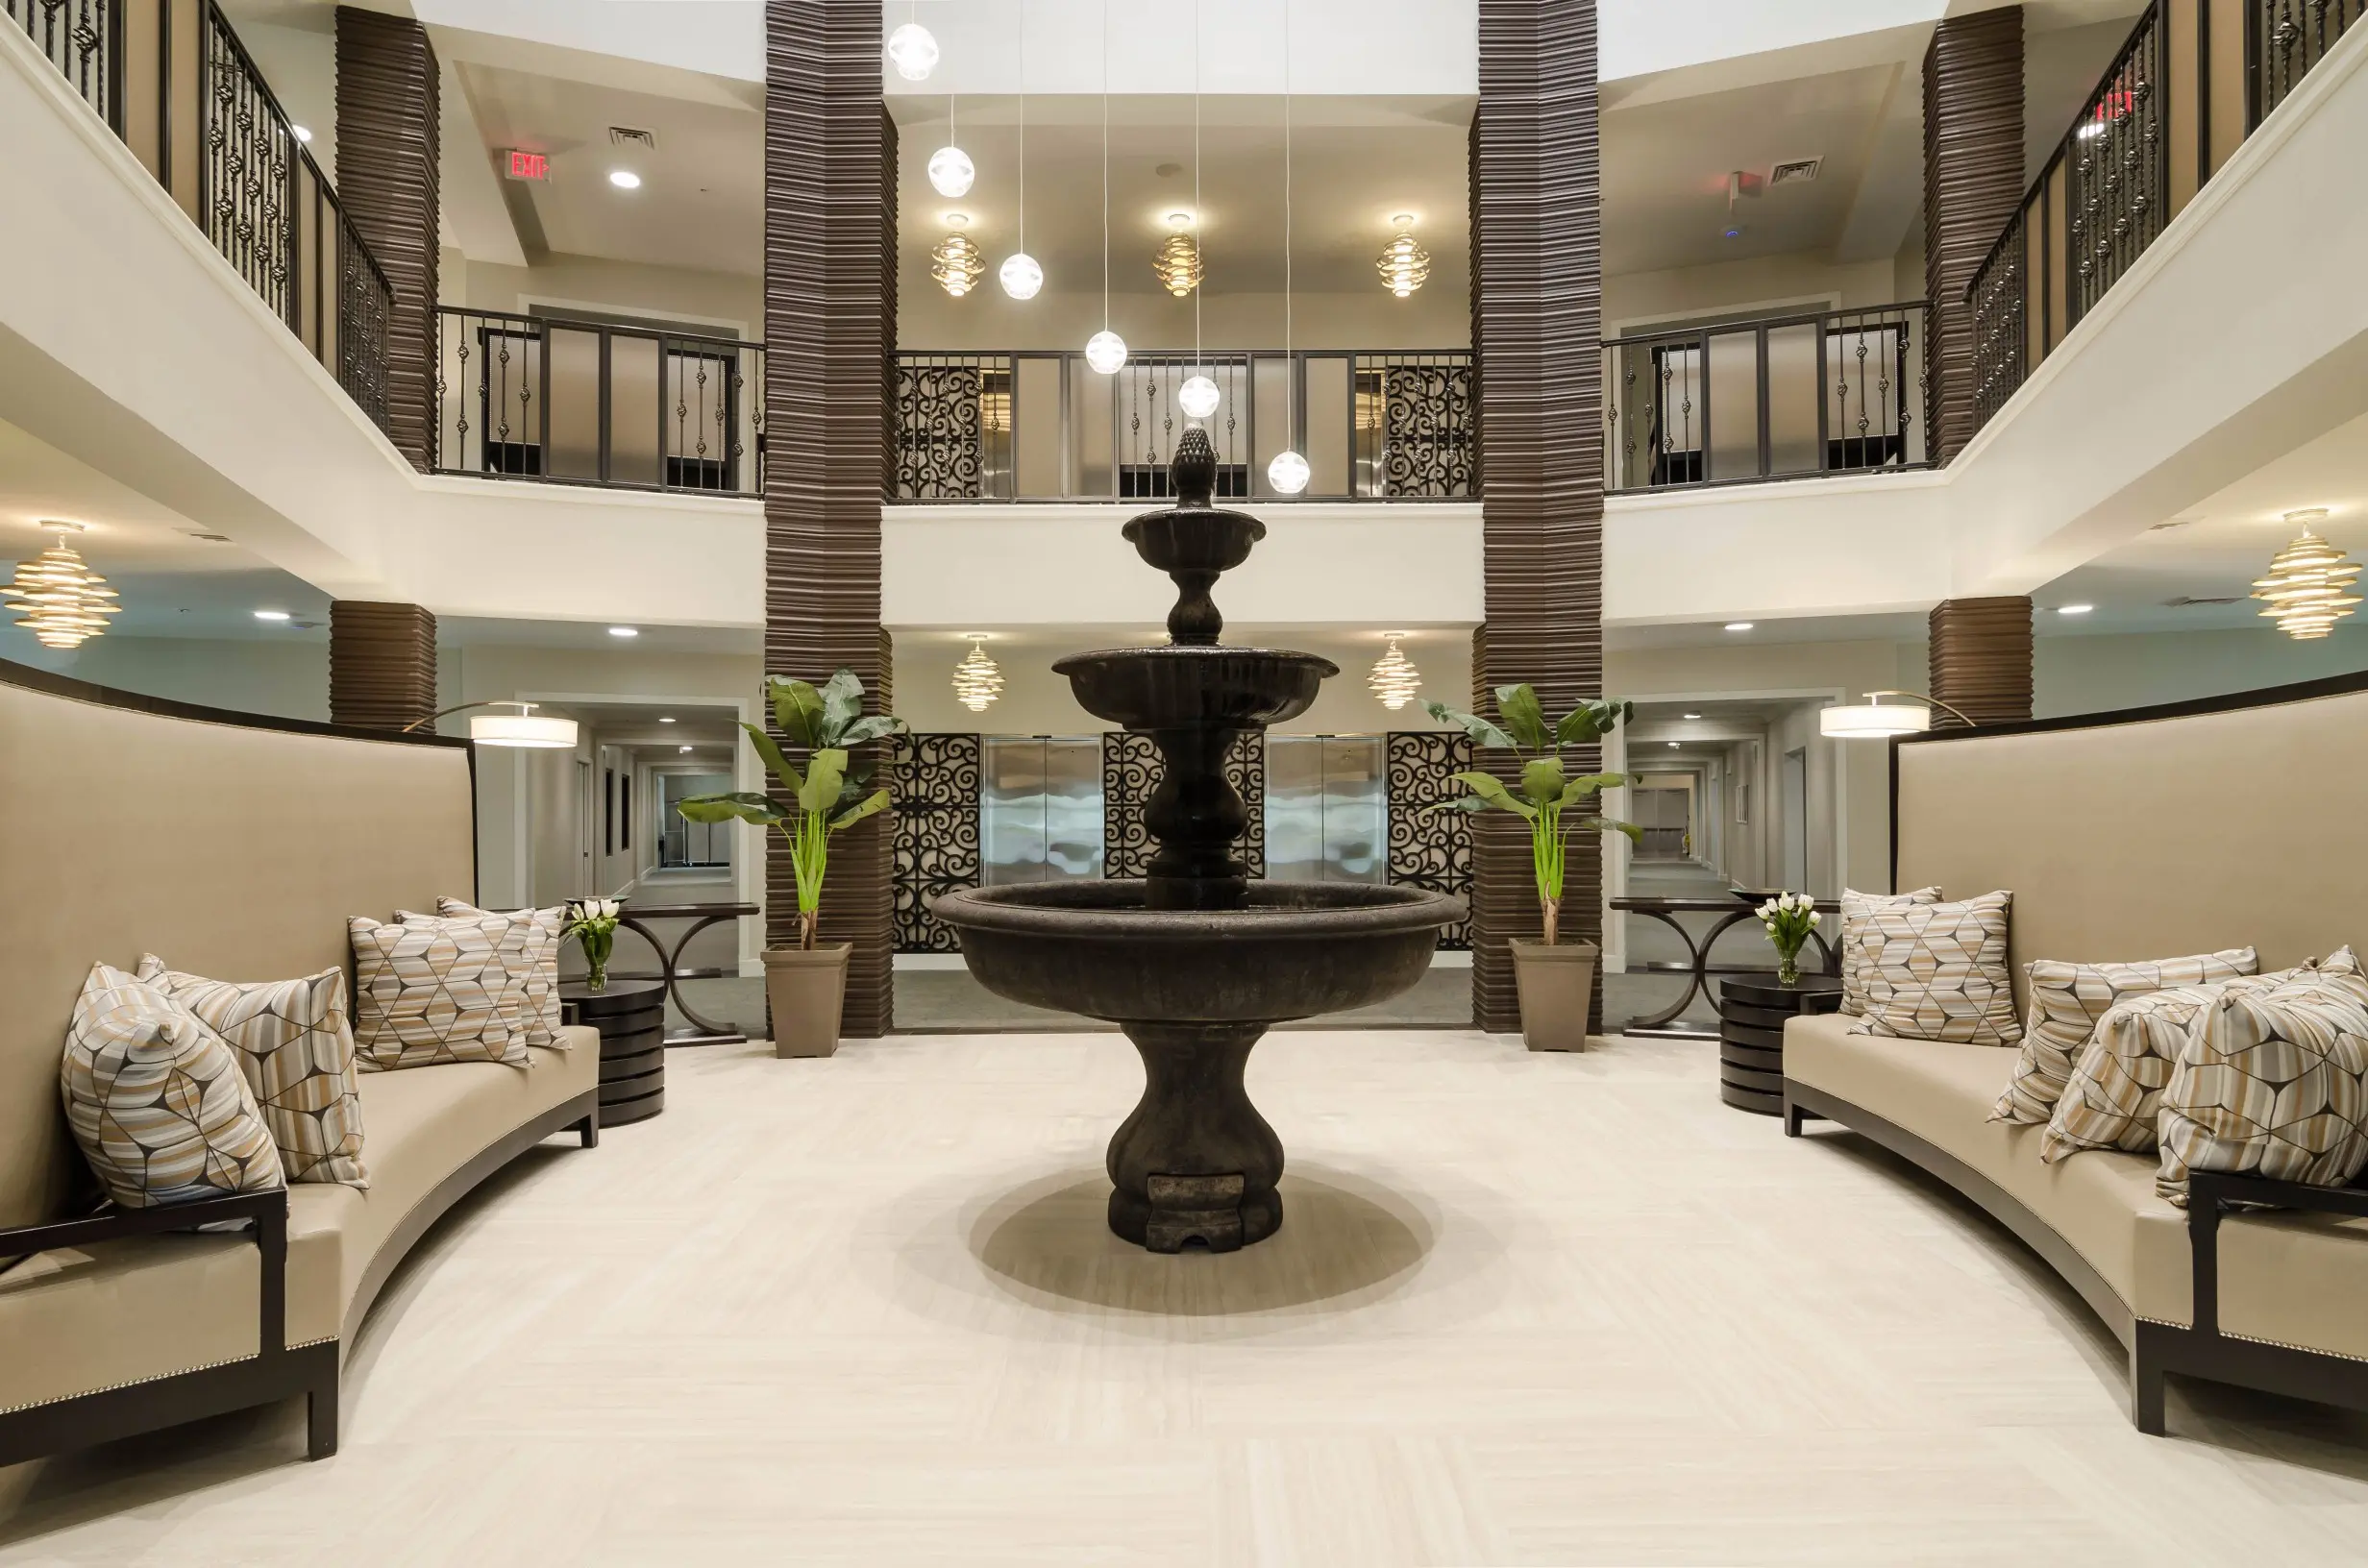 Lobby / fountain at American House Coconut Point, a senior living community in Estero, FL